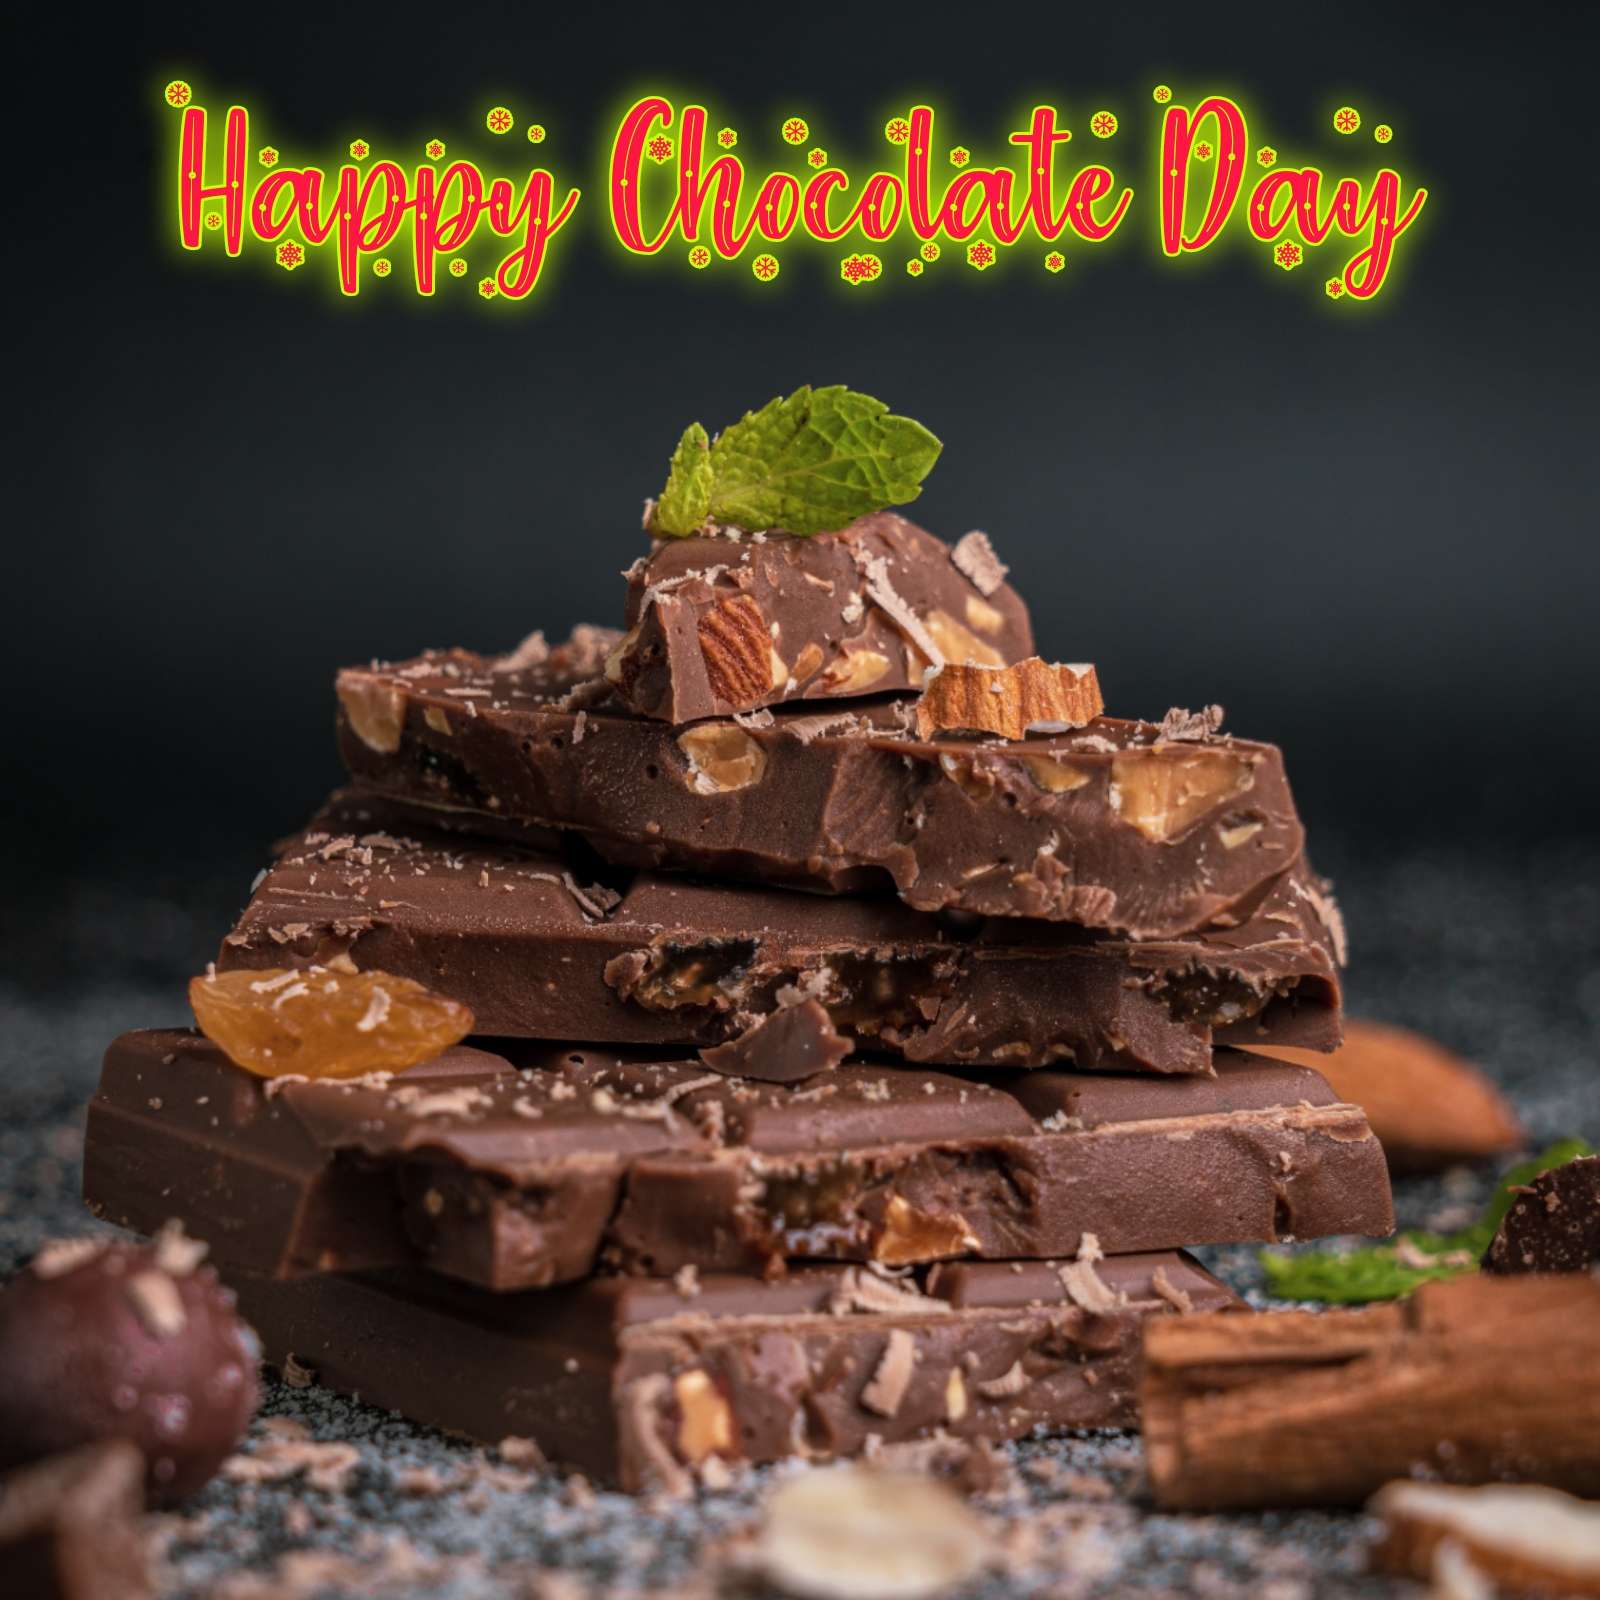 Happy Chocolate Day Images 2022 HD Download